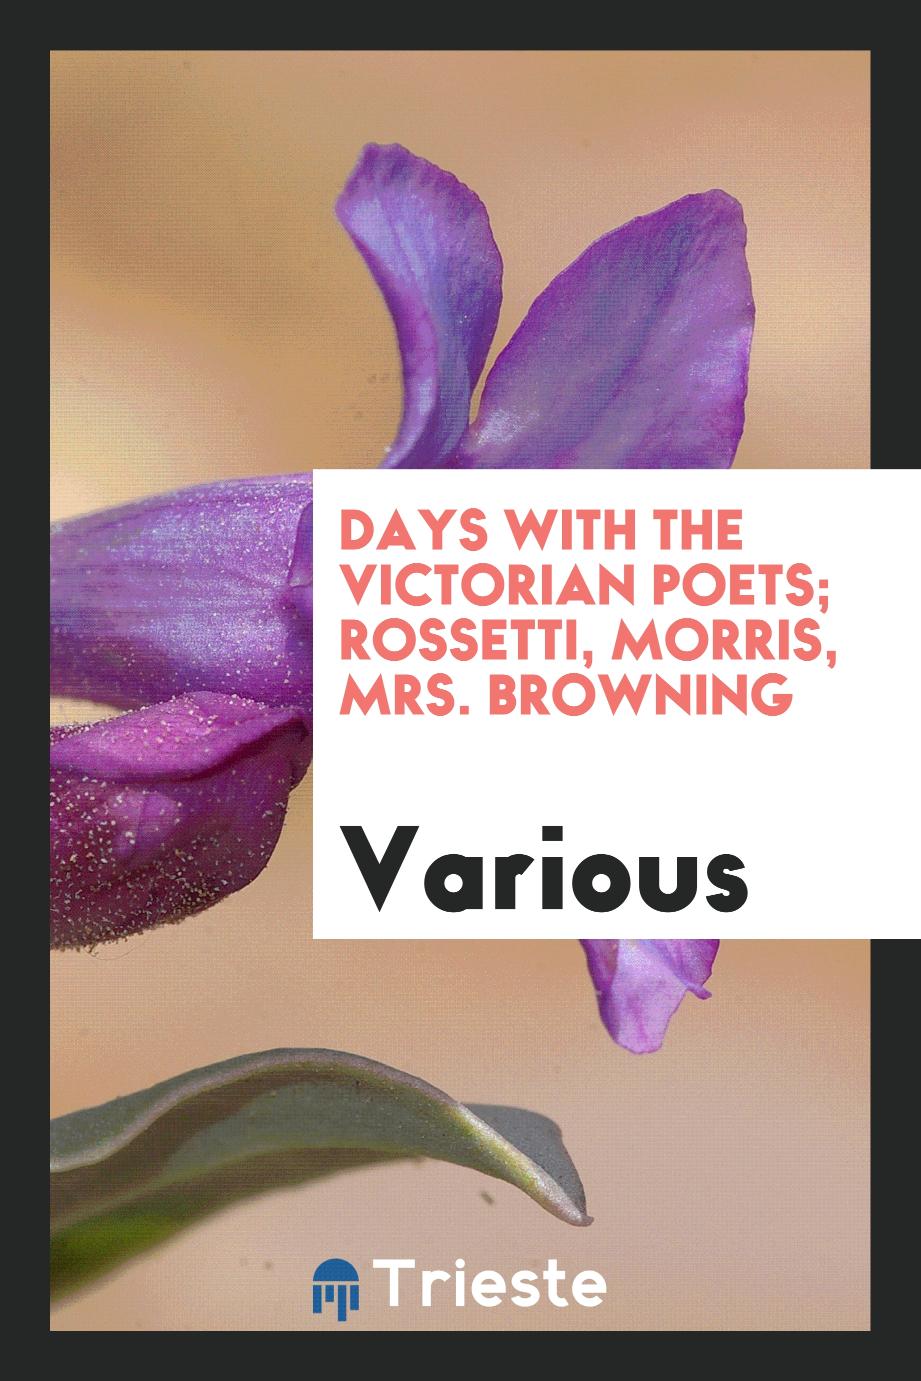 Days with the Victorian poets; Rossetti, Morris, Mrs. Browning